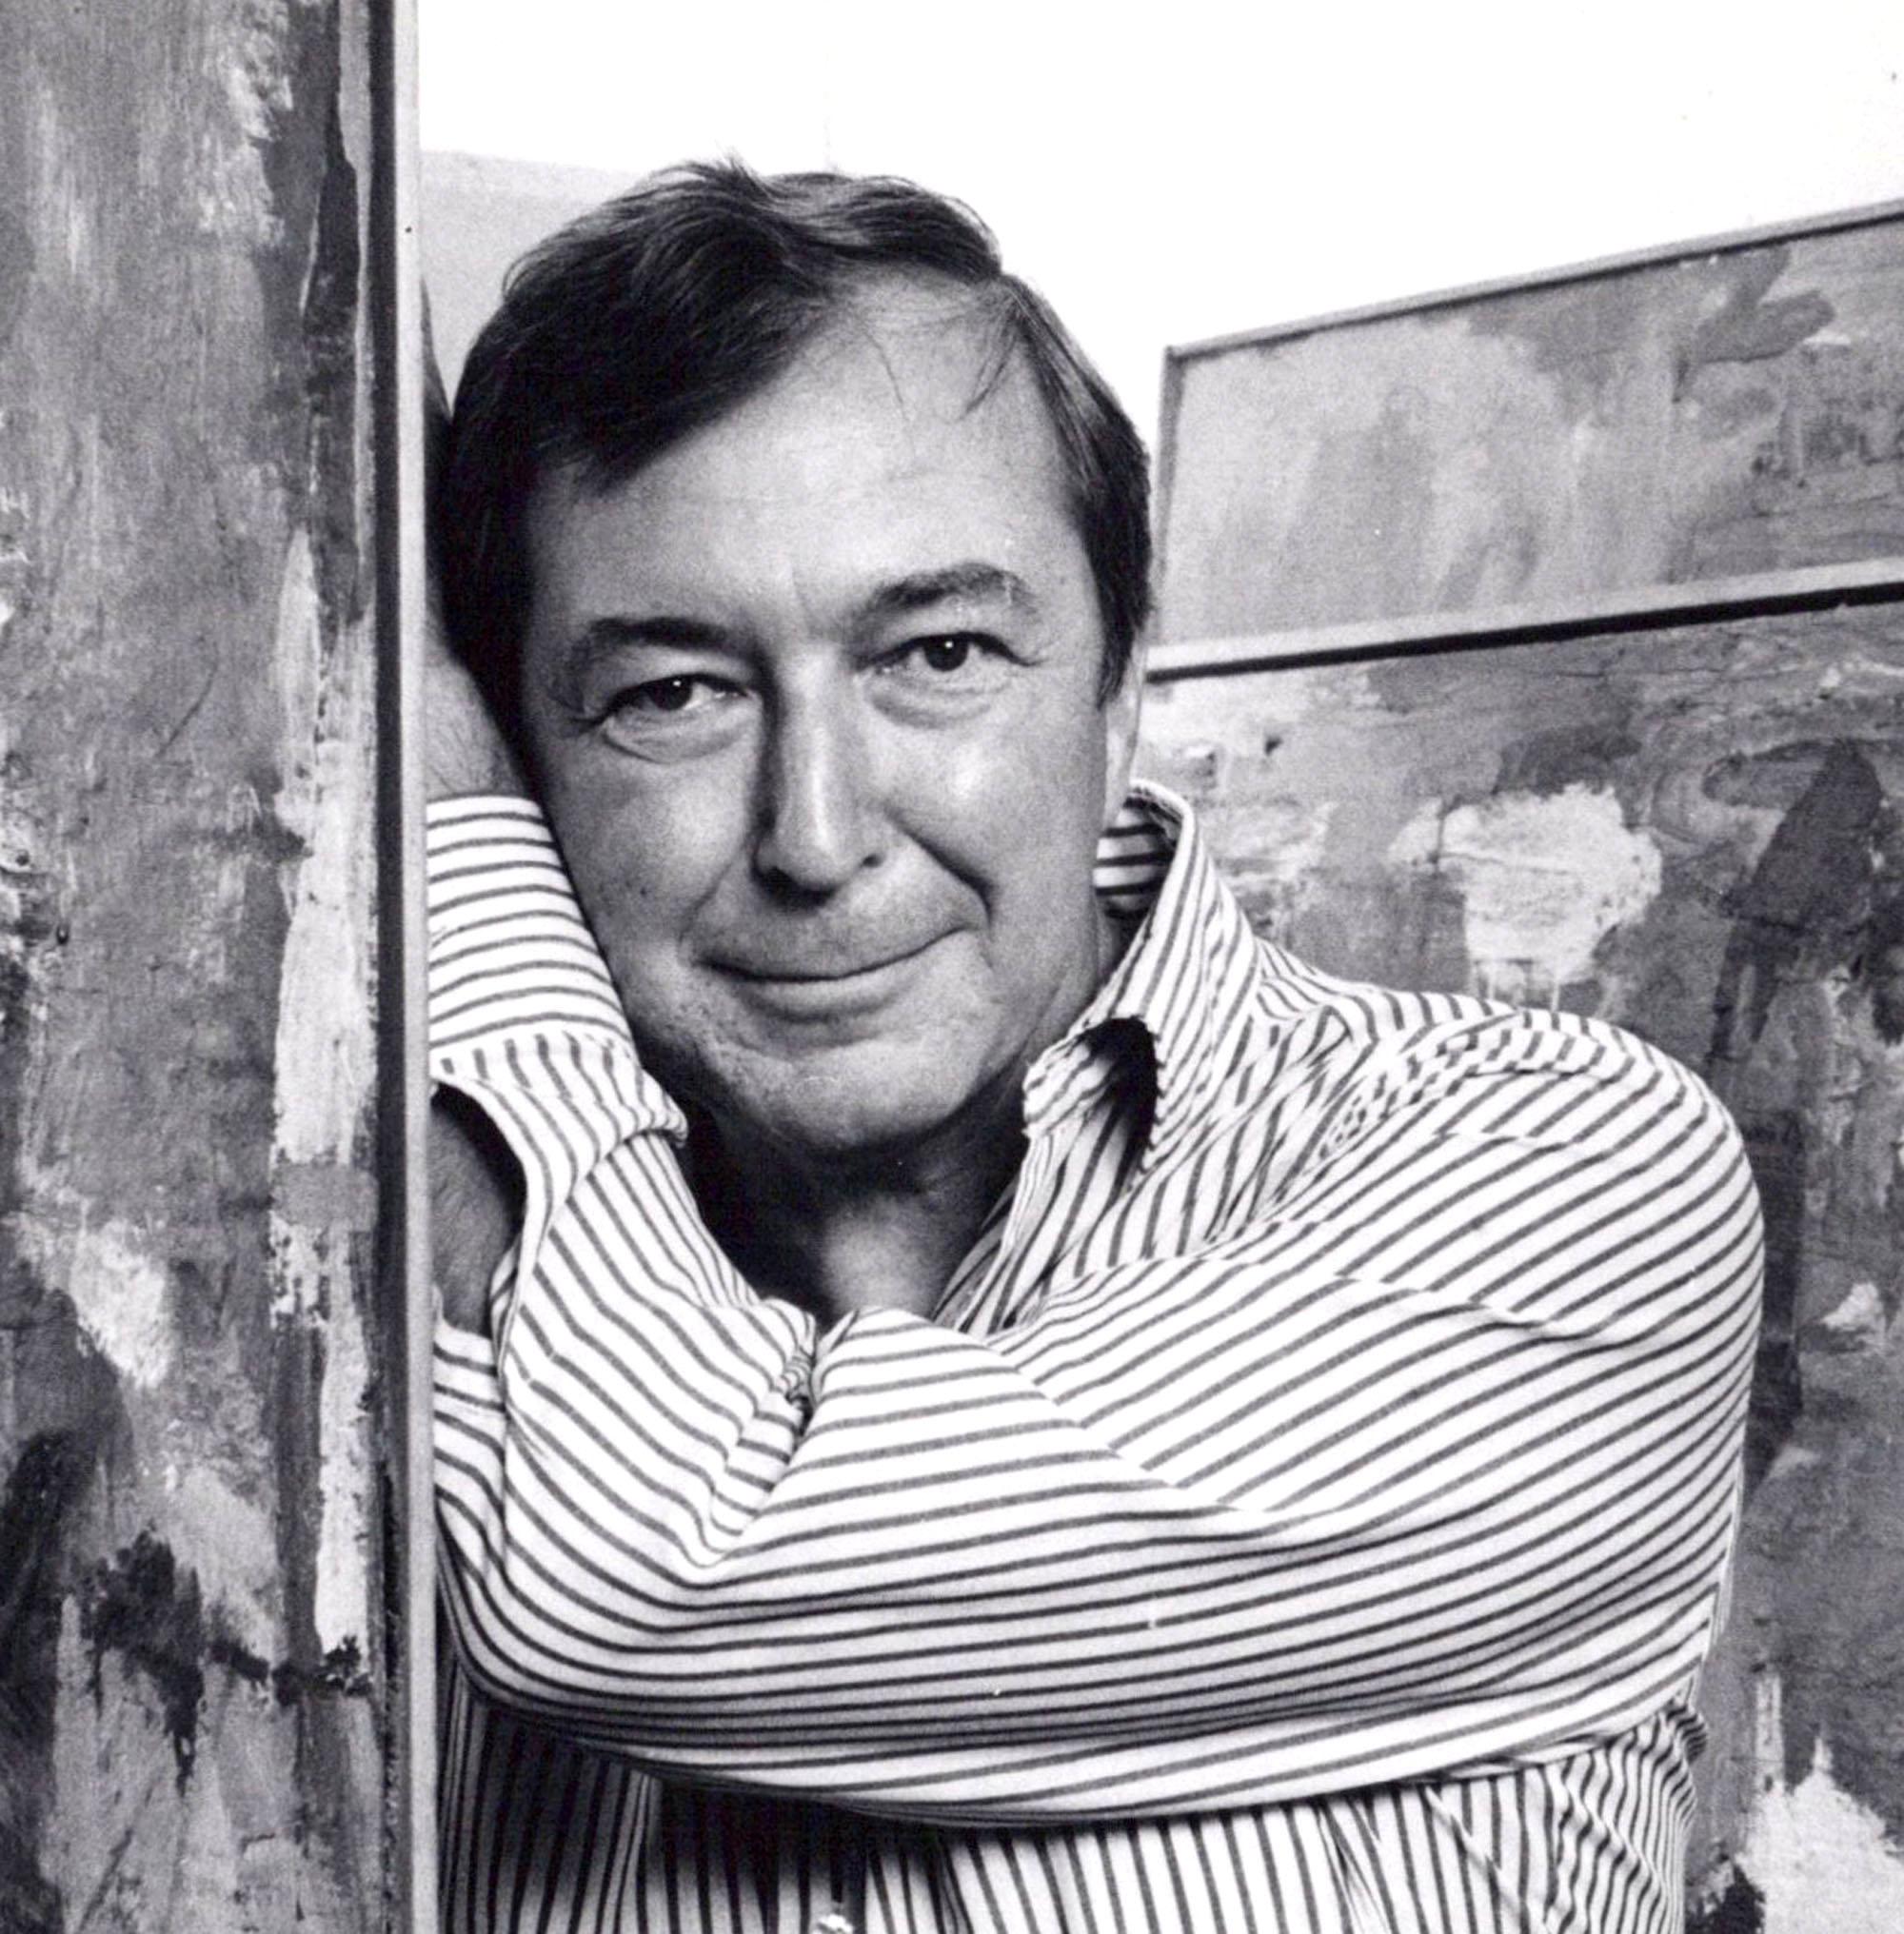 Artist Jasper Johns photographed with his work at the Whitney in New York City - Photograph by Jack Mitchell